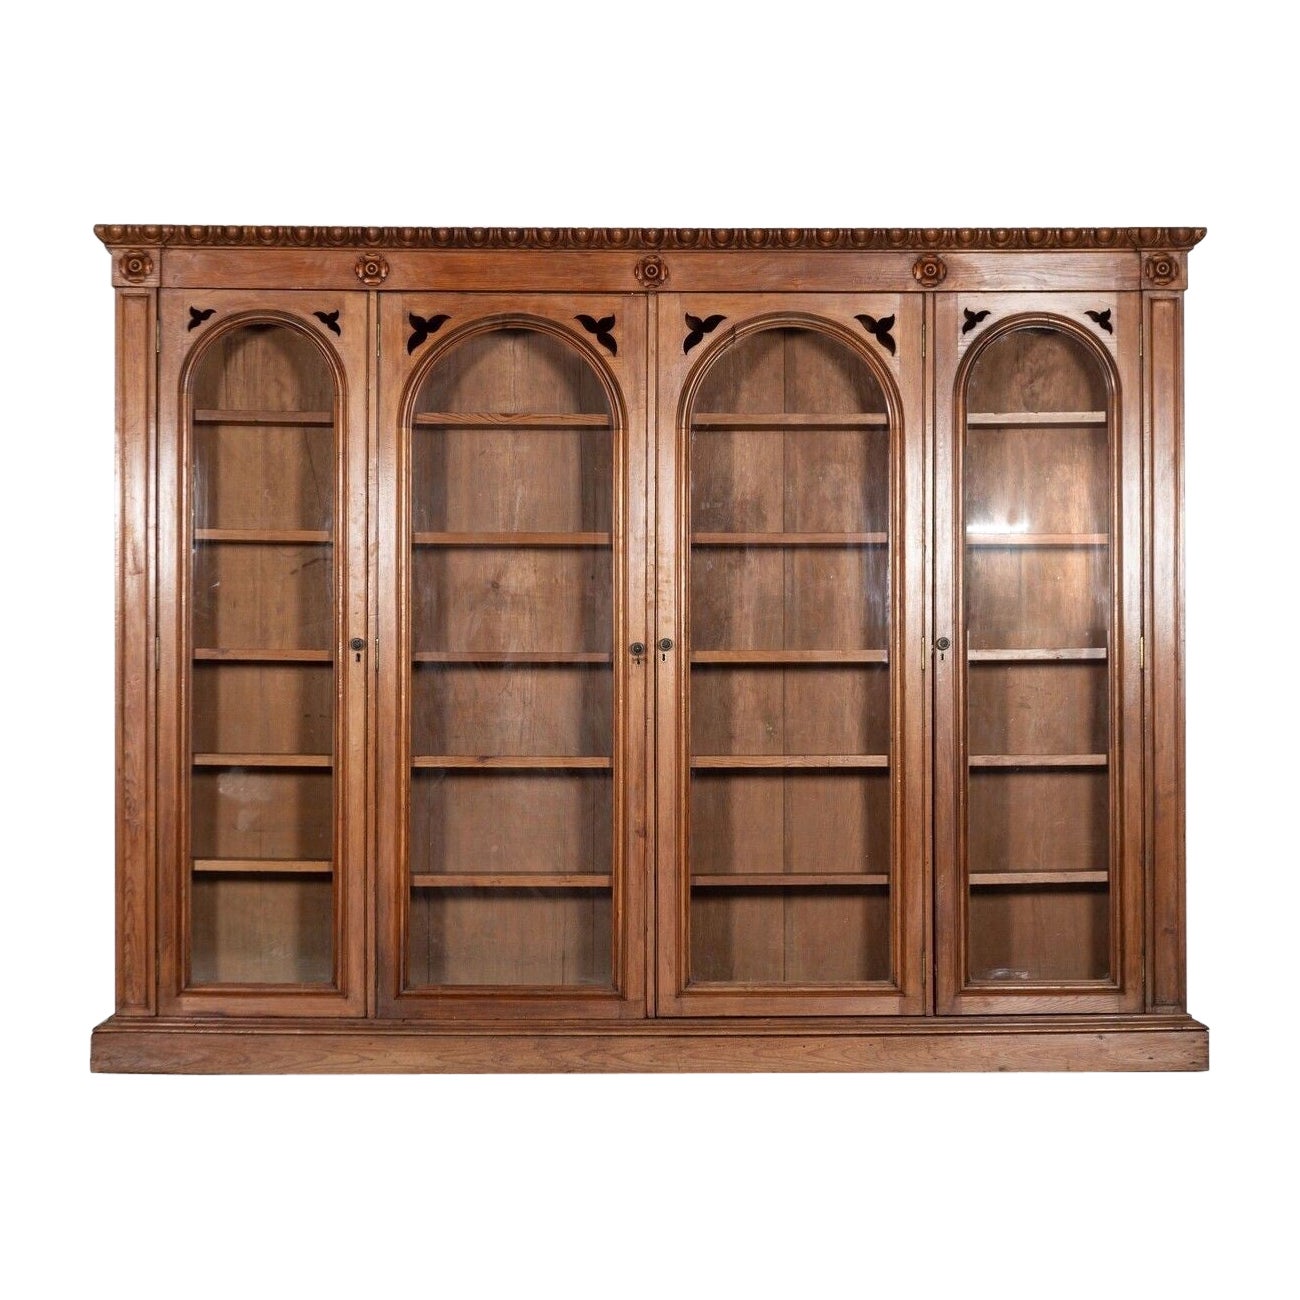 Monumental 19th Century English Pine Arched Glazed Bookcase For Sale